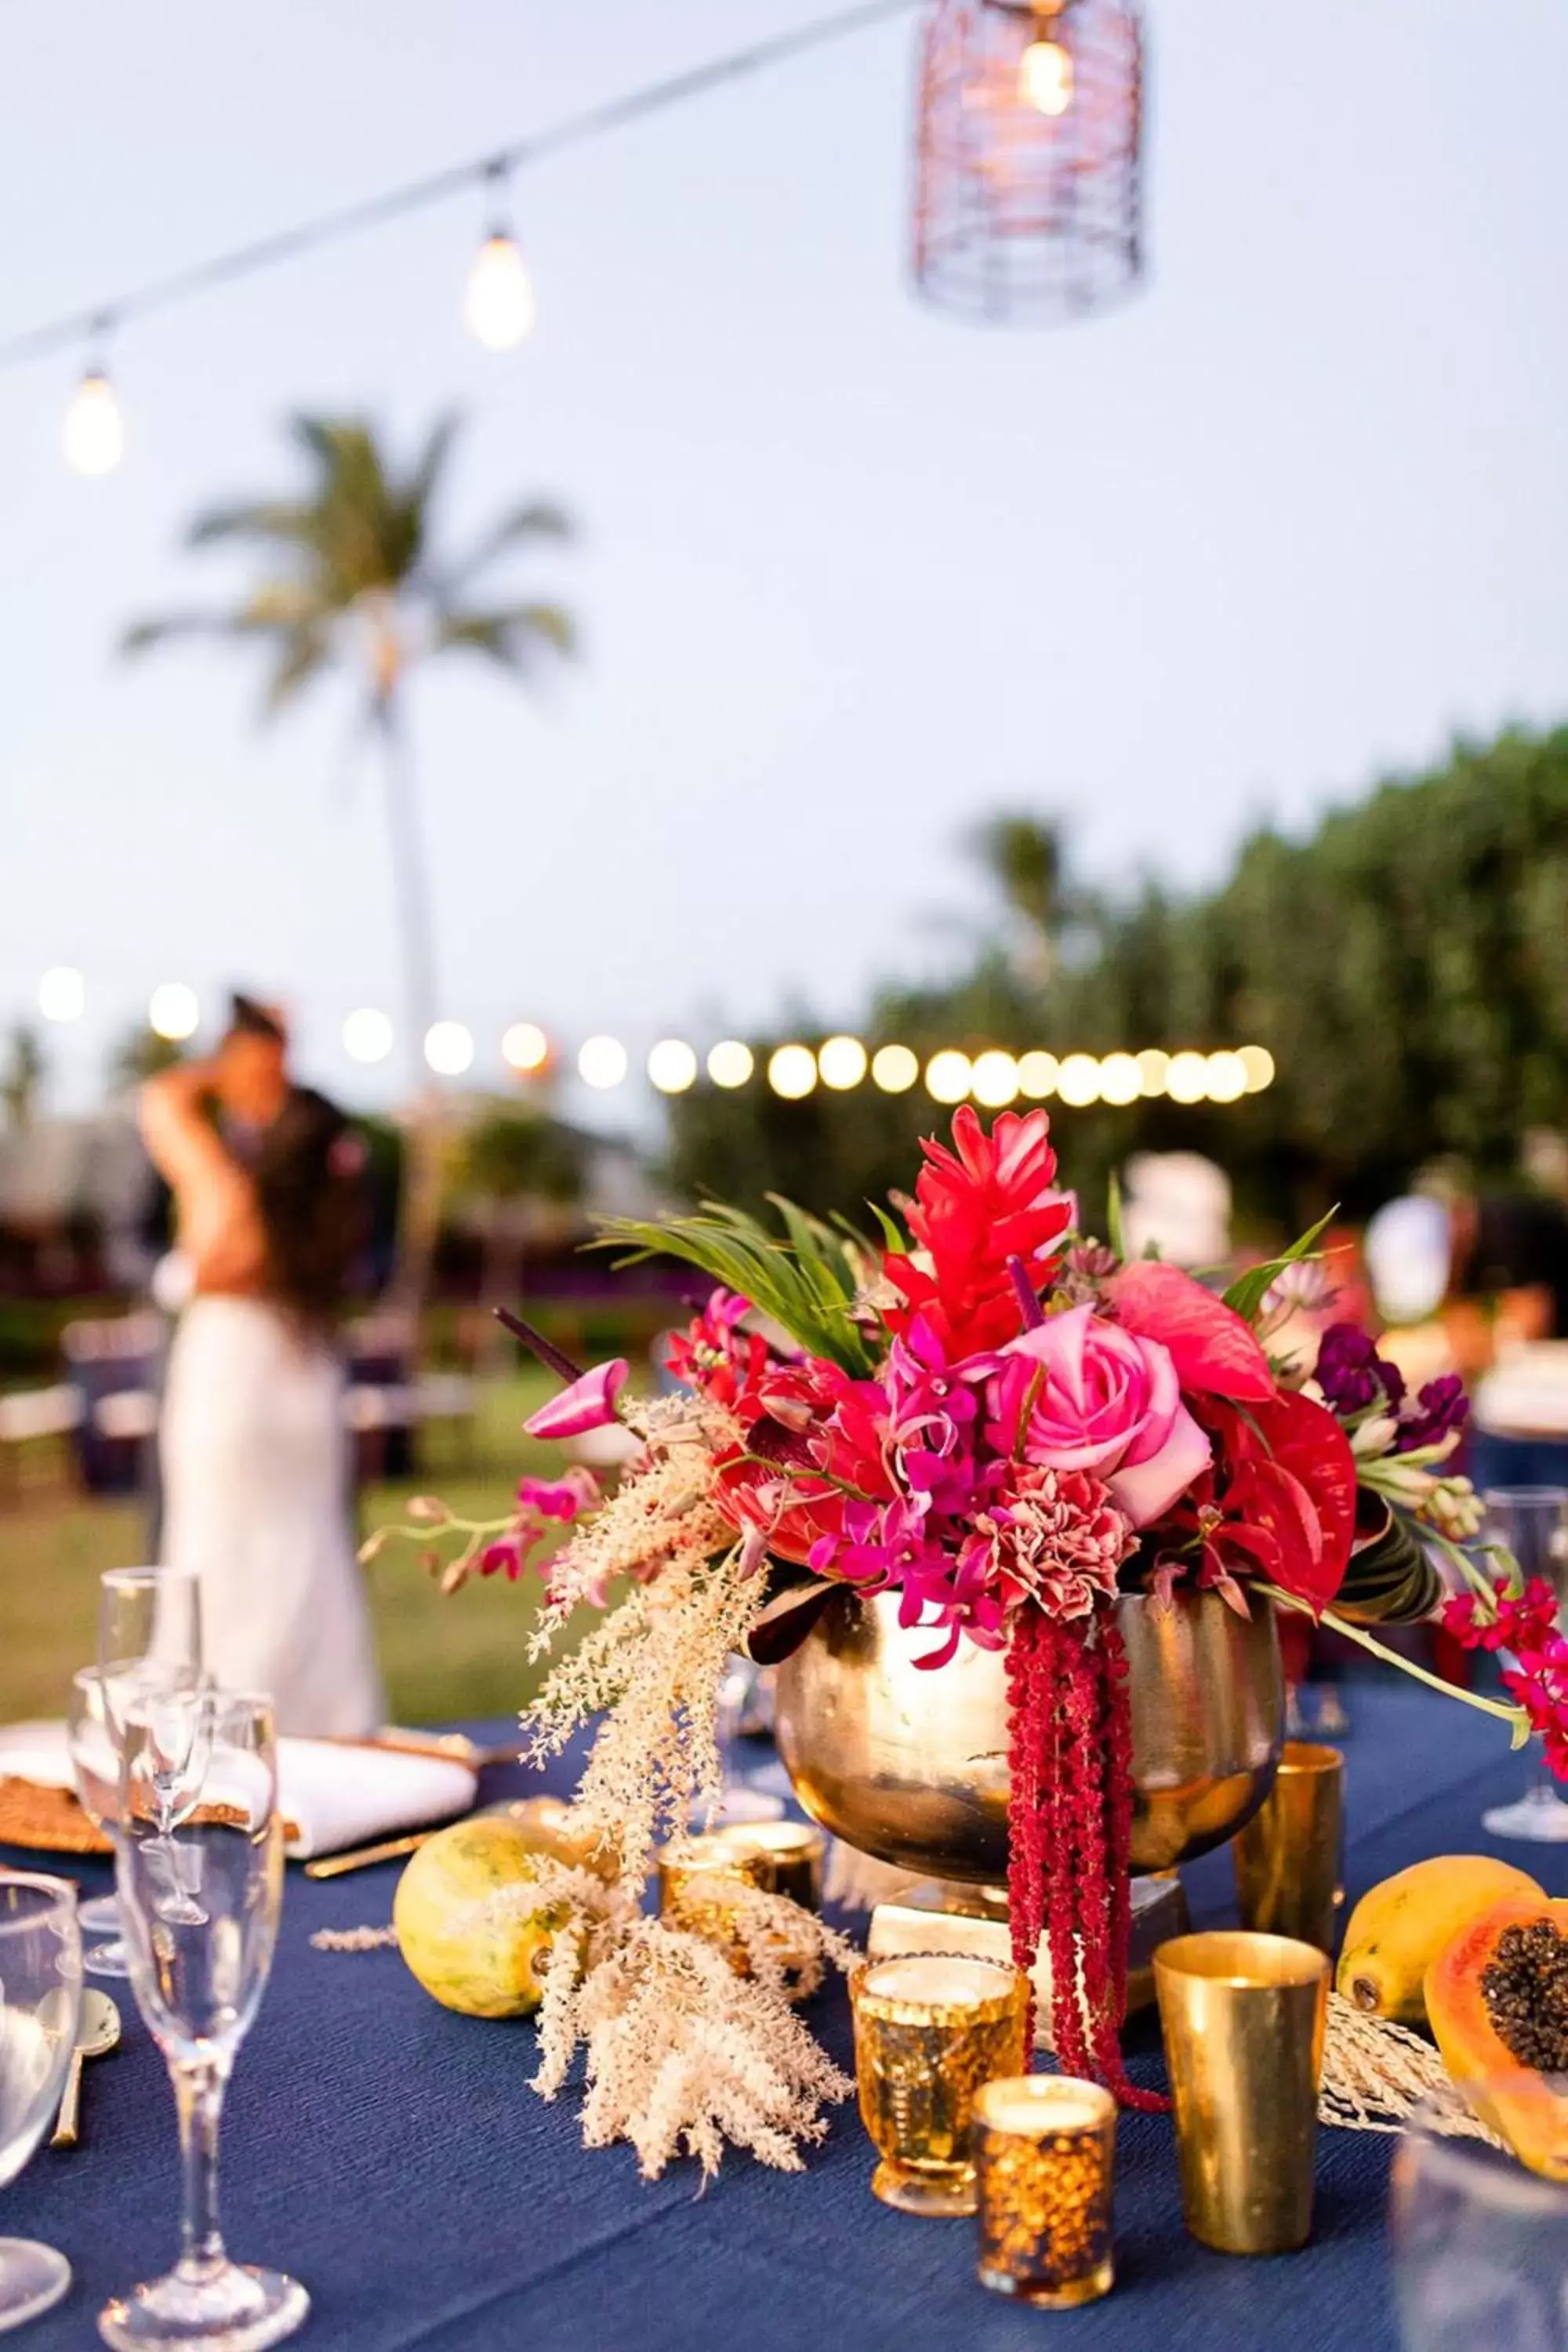 Lobby or reception, Restaurant/Places to Eat in Waikoloa Beach Marriott Resort & Spa